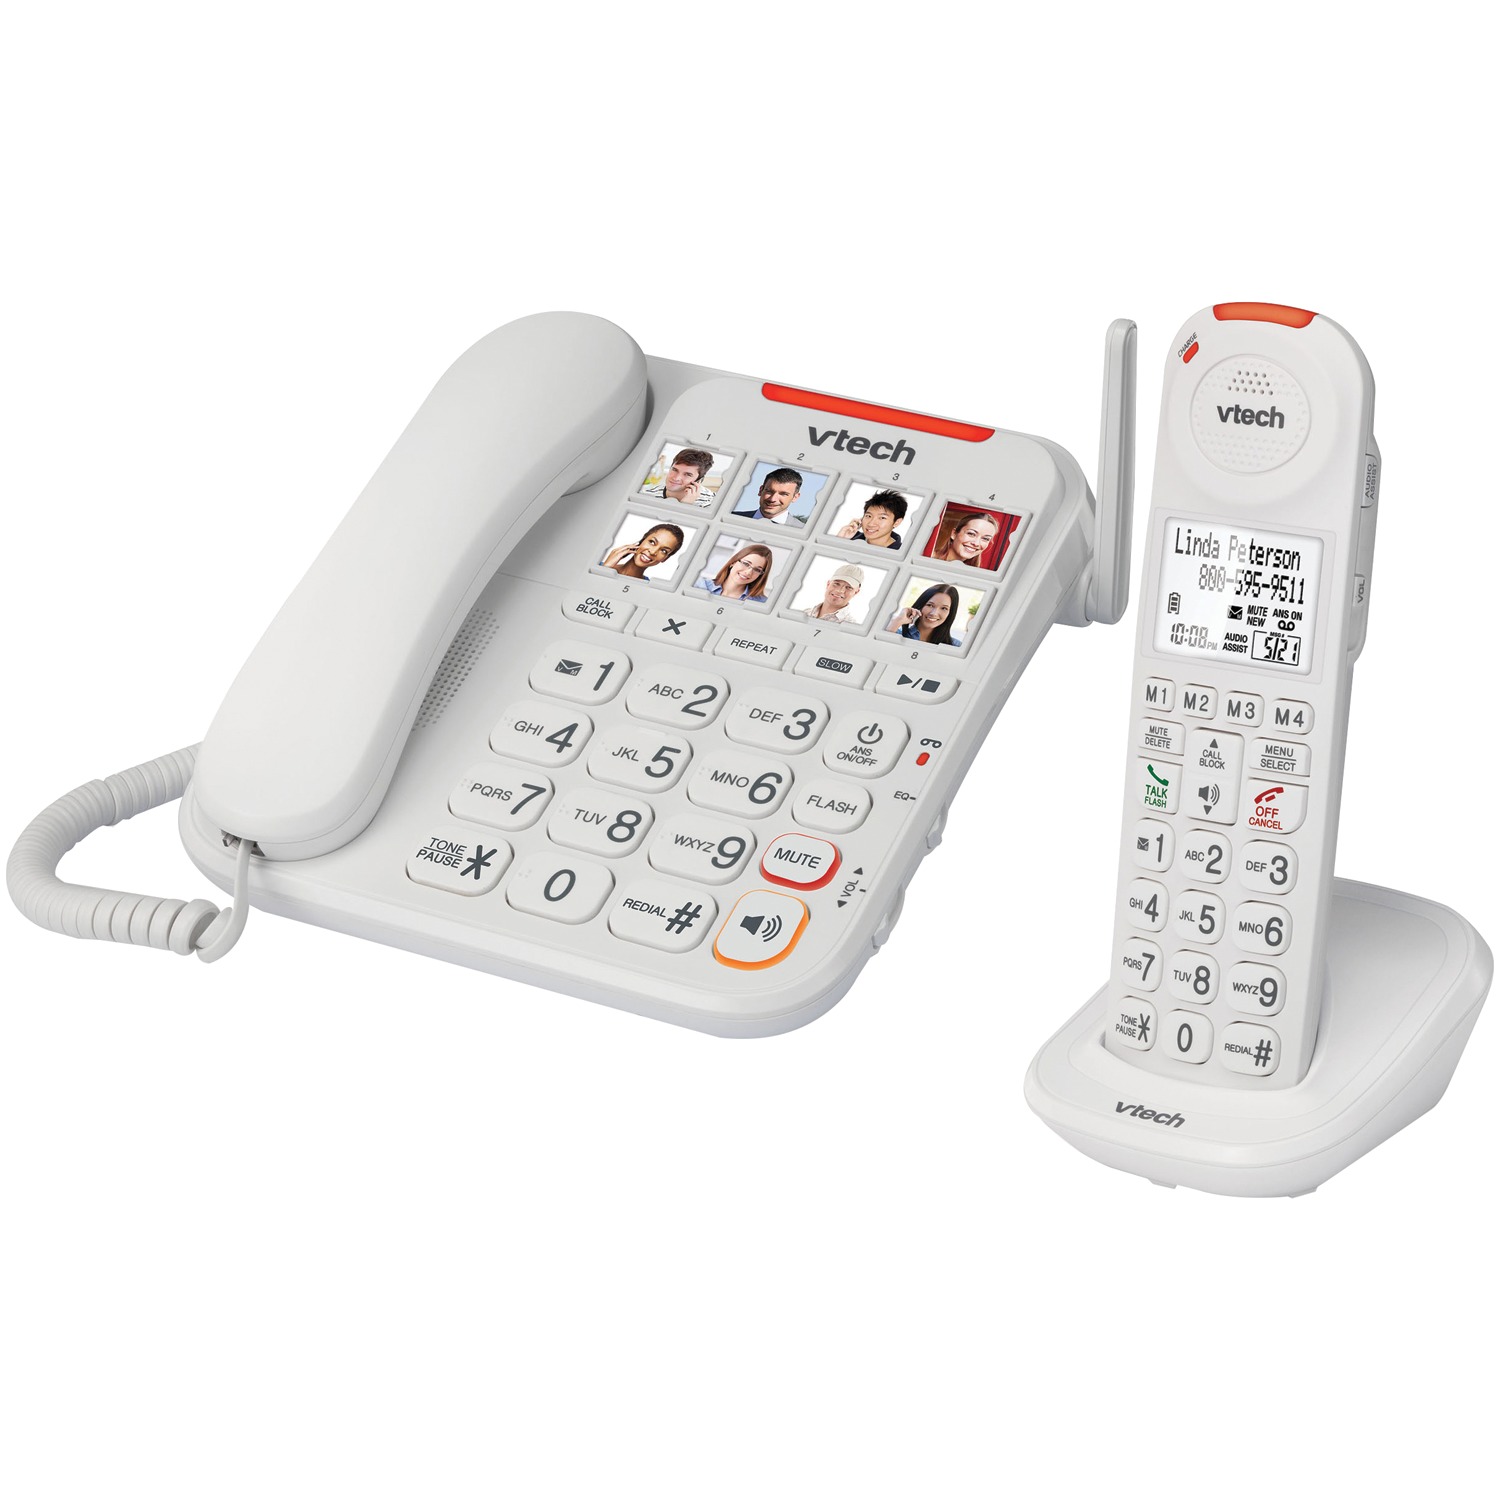 VTech Amplified Corded/Cordless Answering System with Big Buttons & Display, VTSN5147 - image 3 of 3